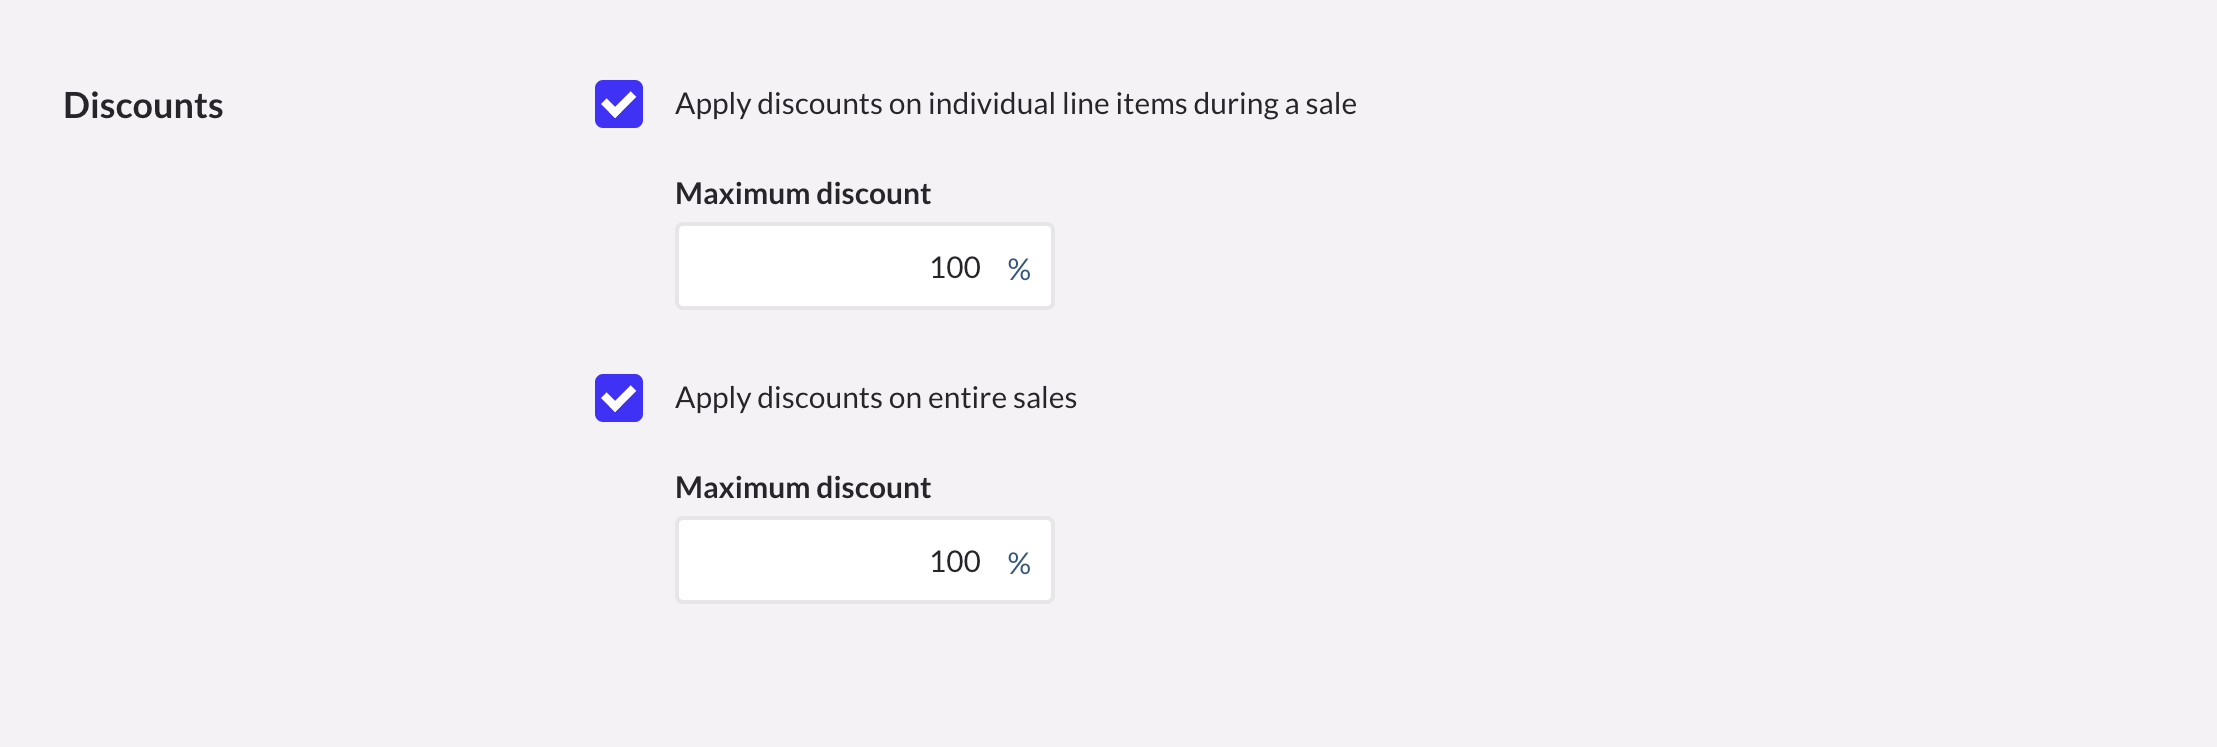 Retail-X-discount-permissions.png